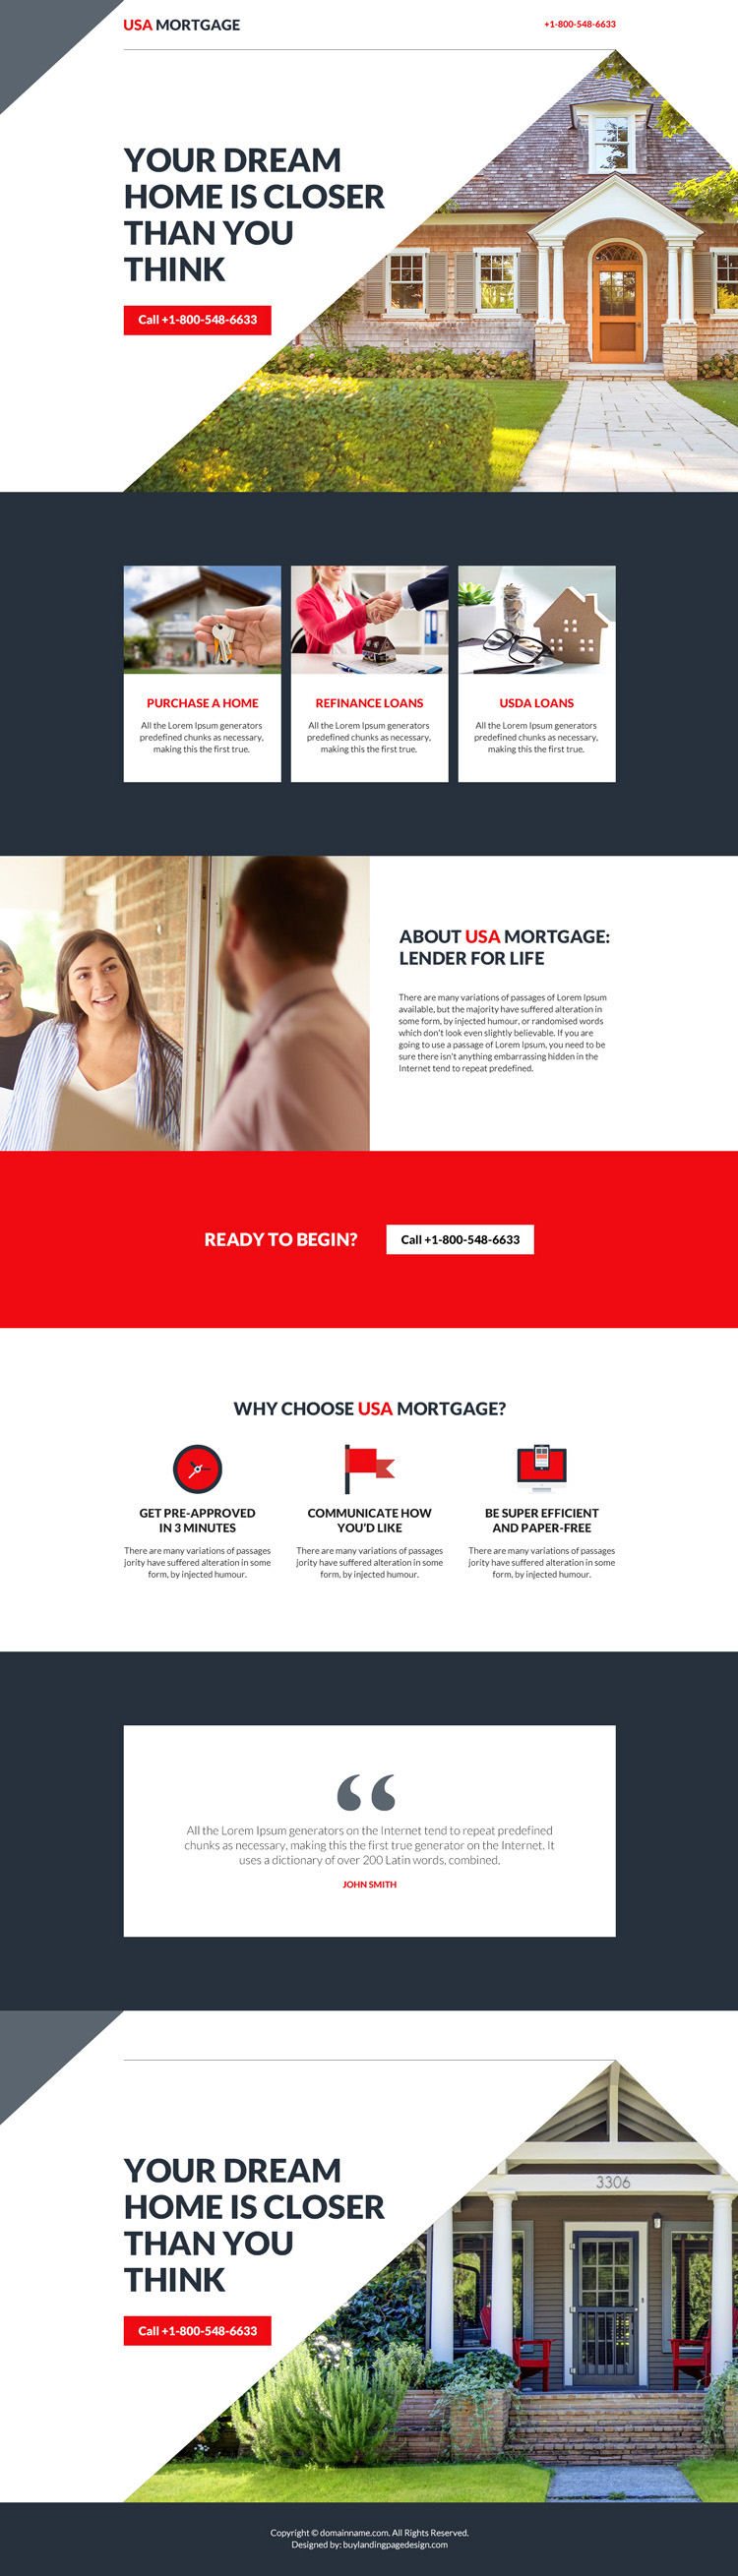 mortgage services click to call landing page